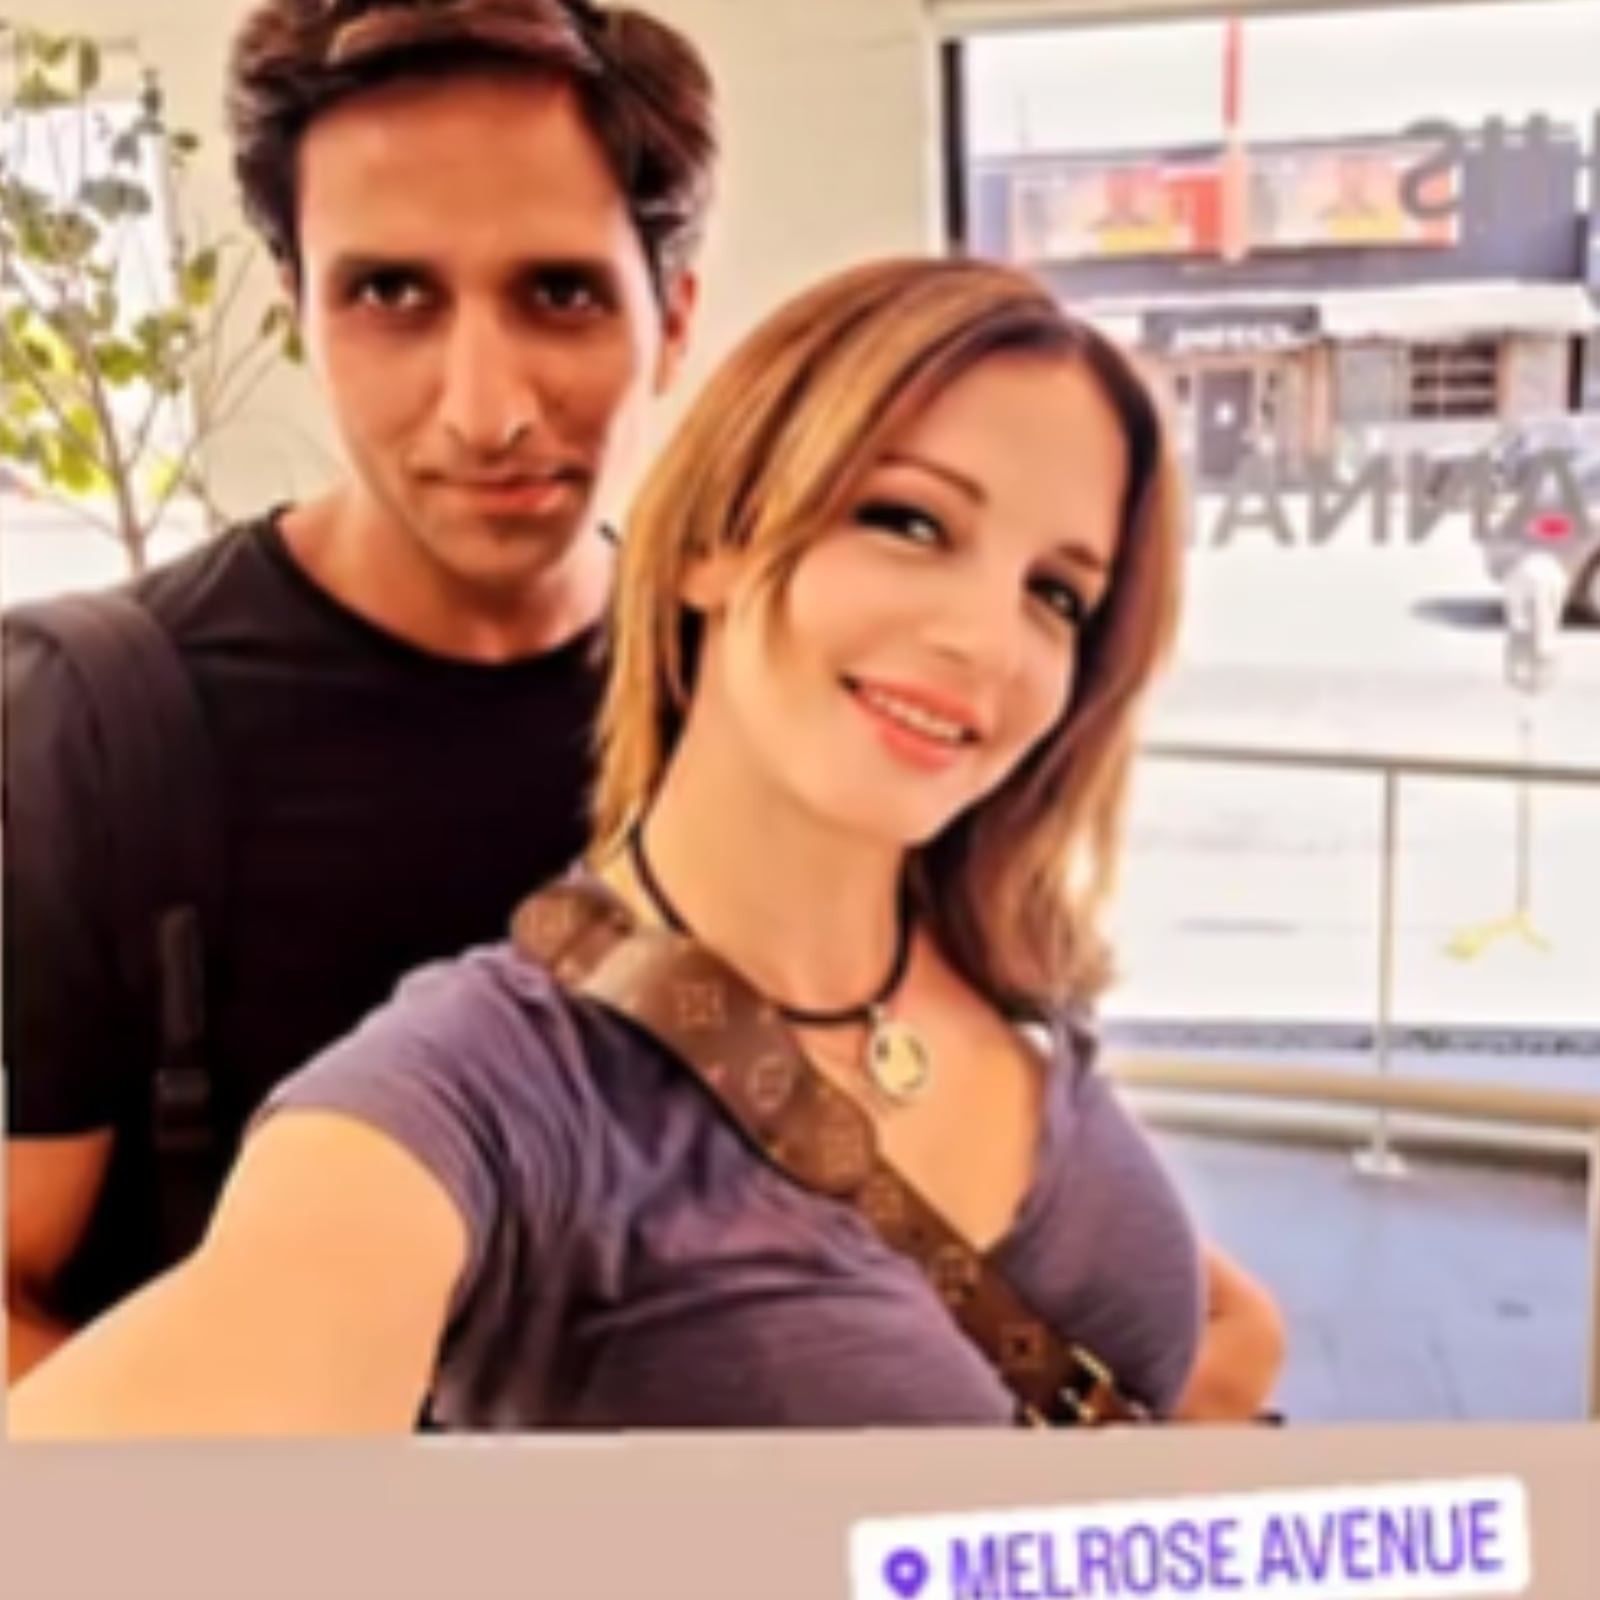 Sussanne Khan Spends Cosy Moment With BF Arslan Goni in Los Angeles; Pic Goes Viral